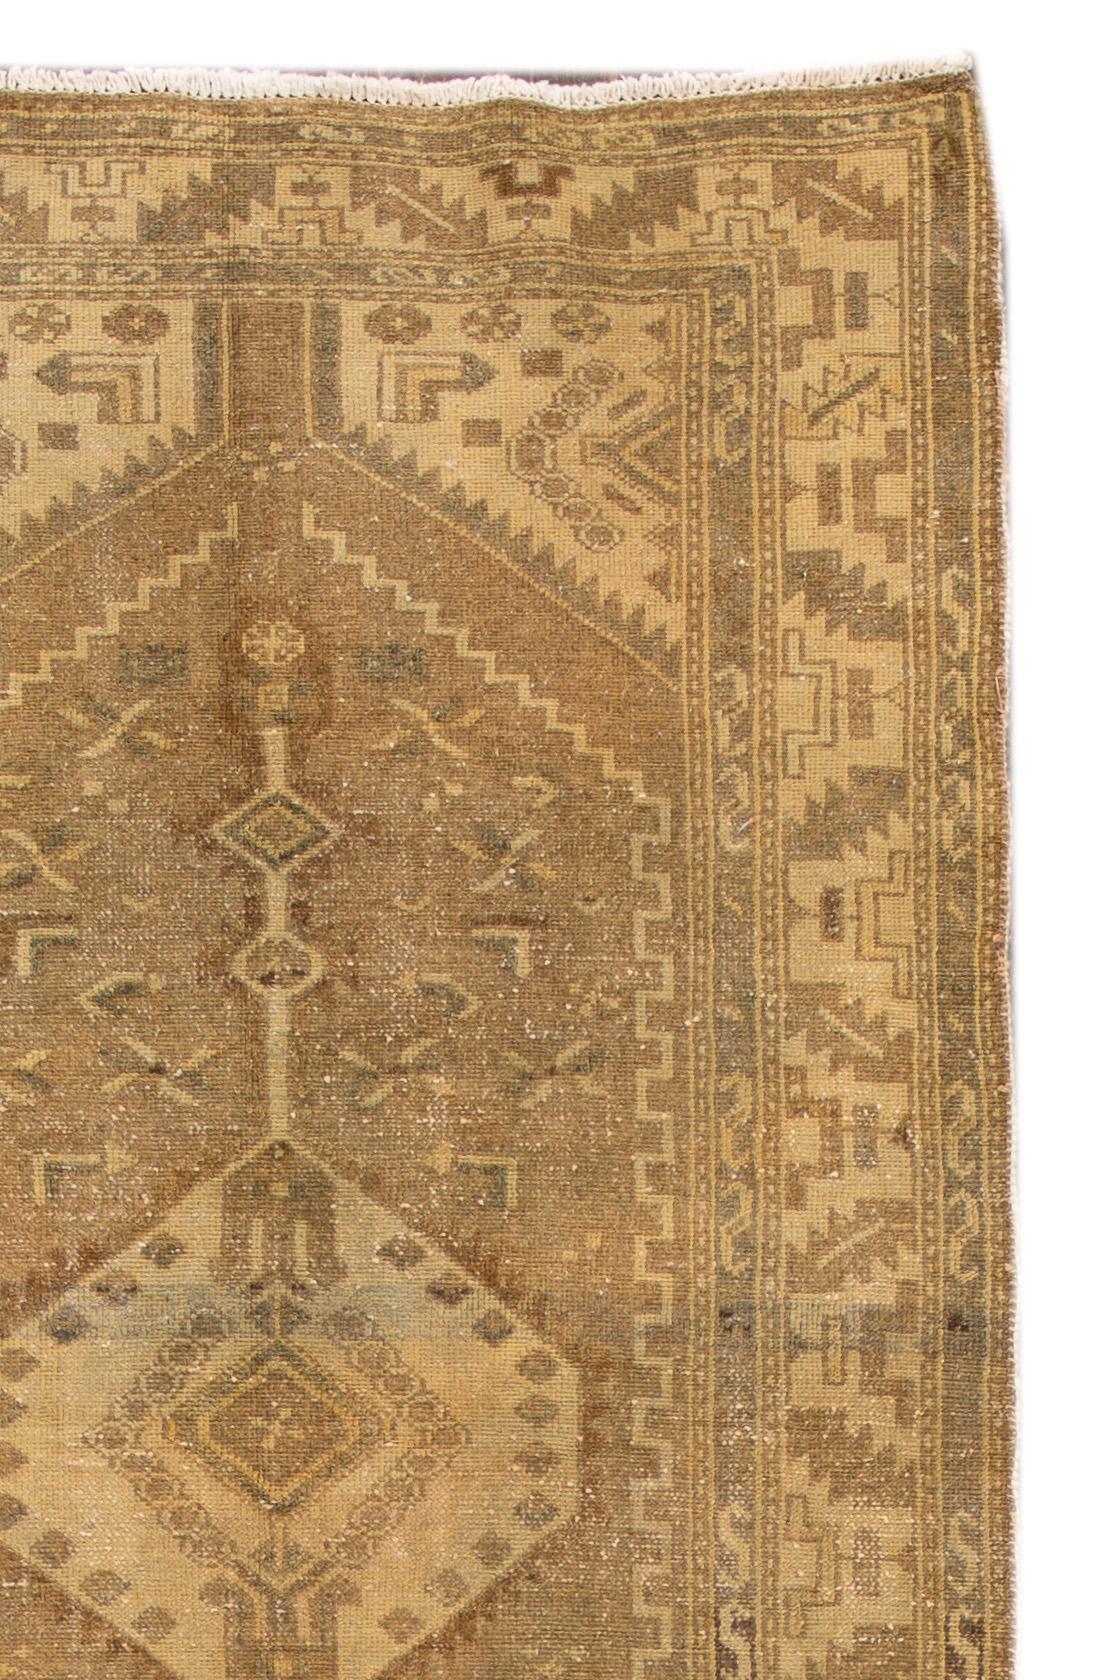 Beautiful Antique Hamadan Runner Rug with a beige field and brown accents with an all over geometric design. 

This rug measures 3' 6